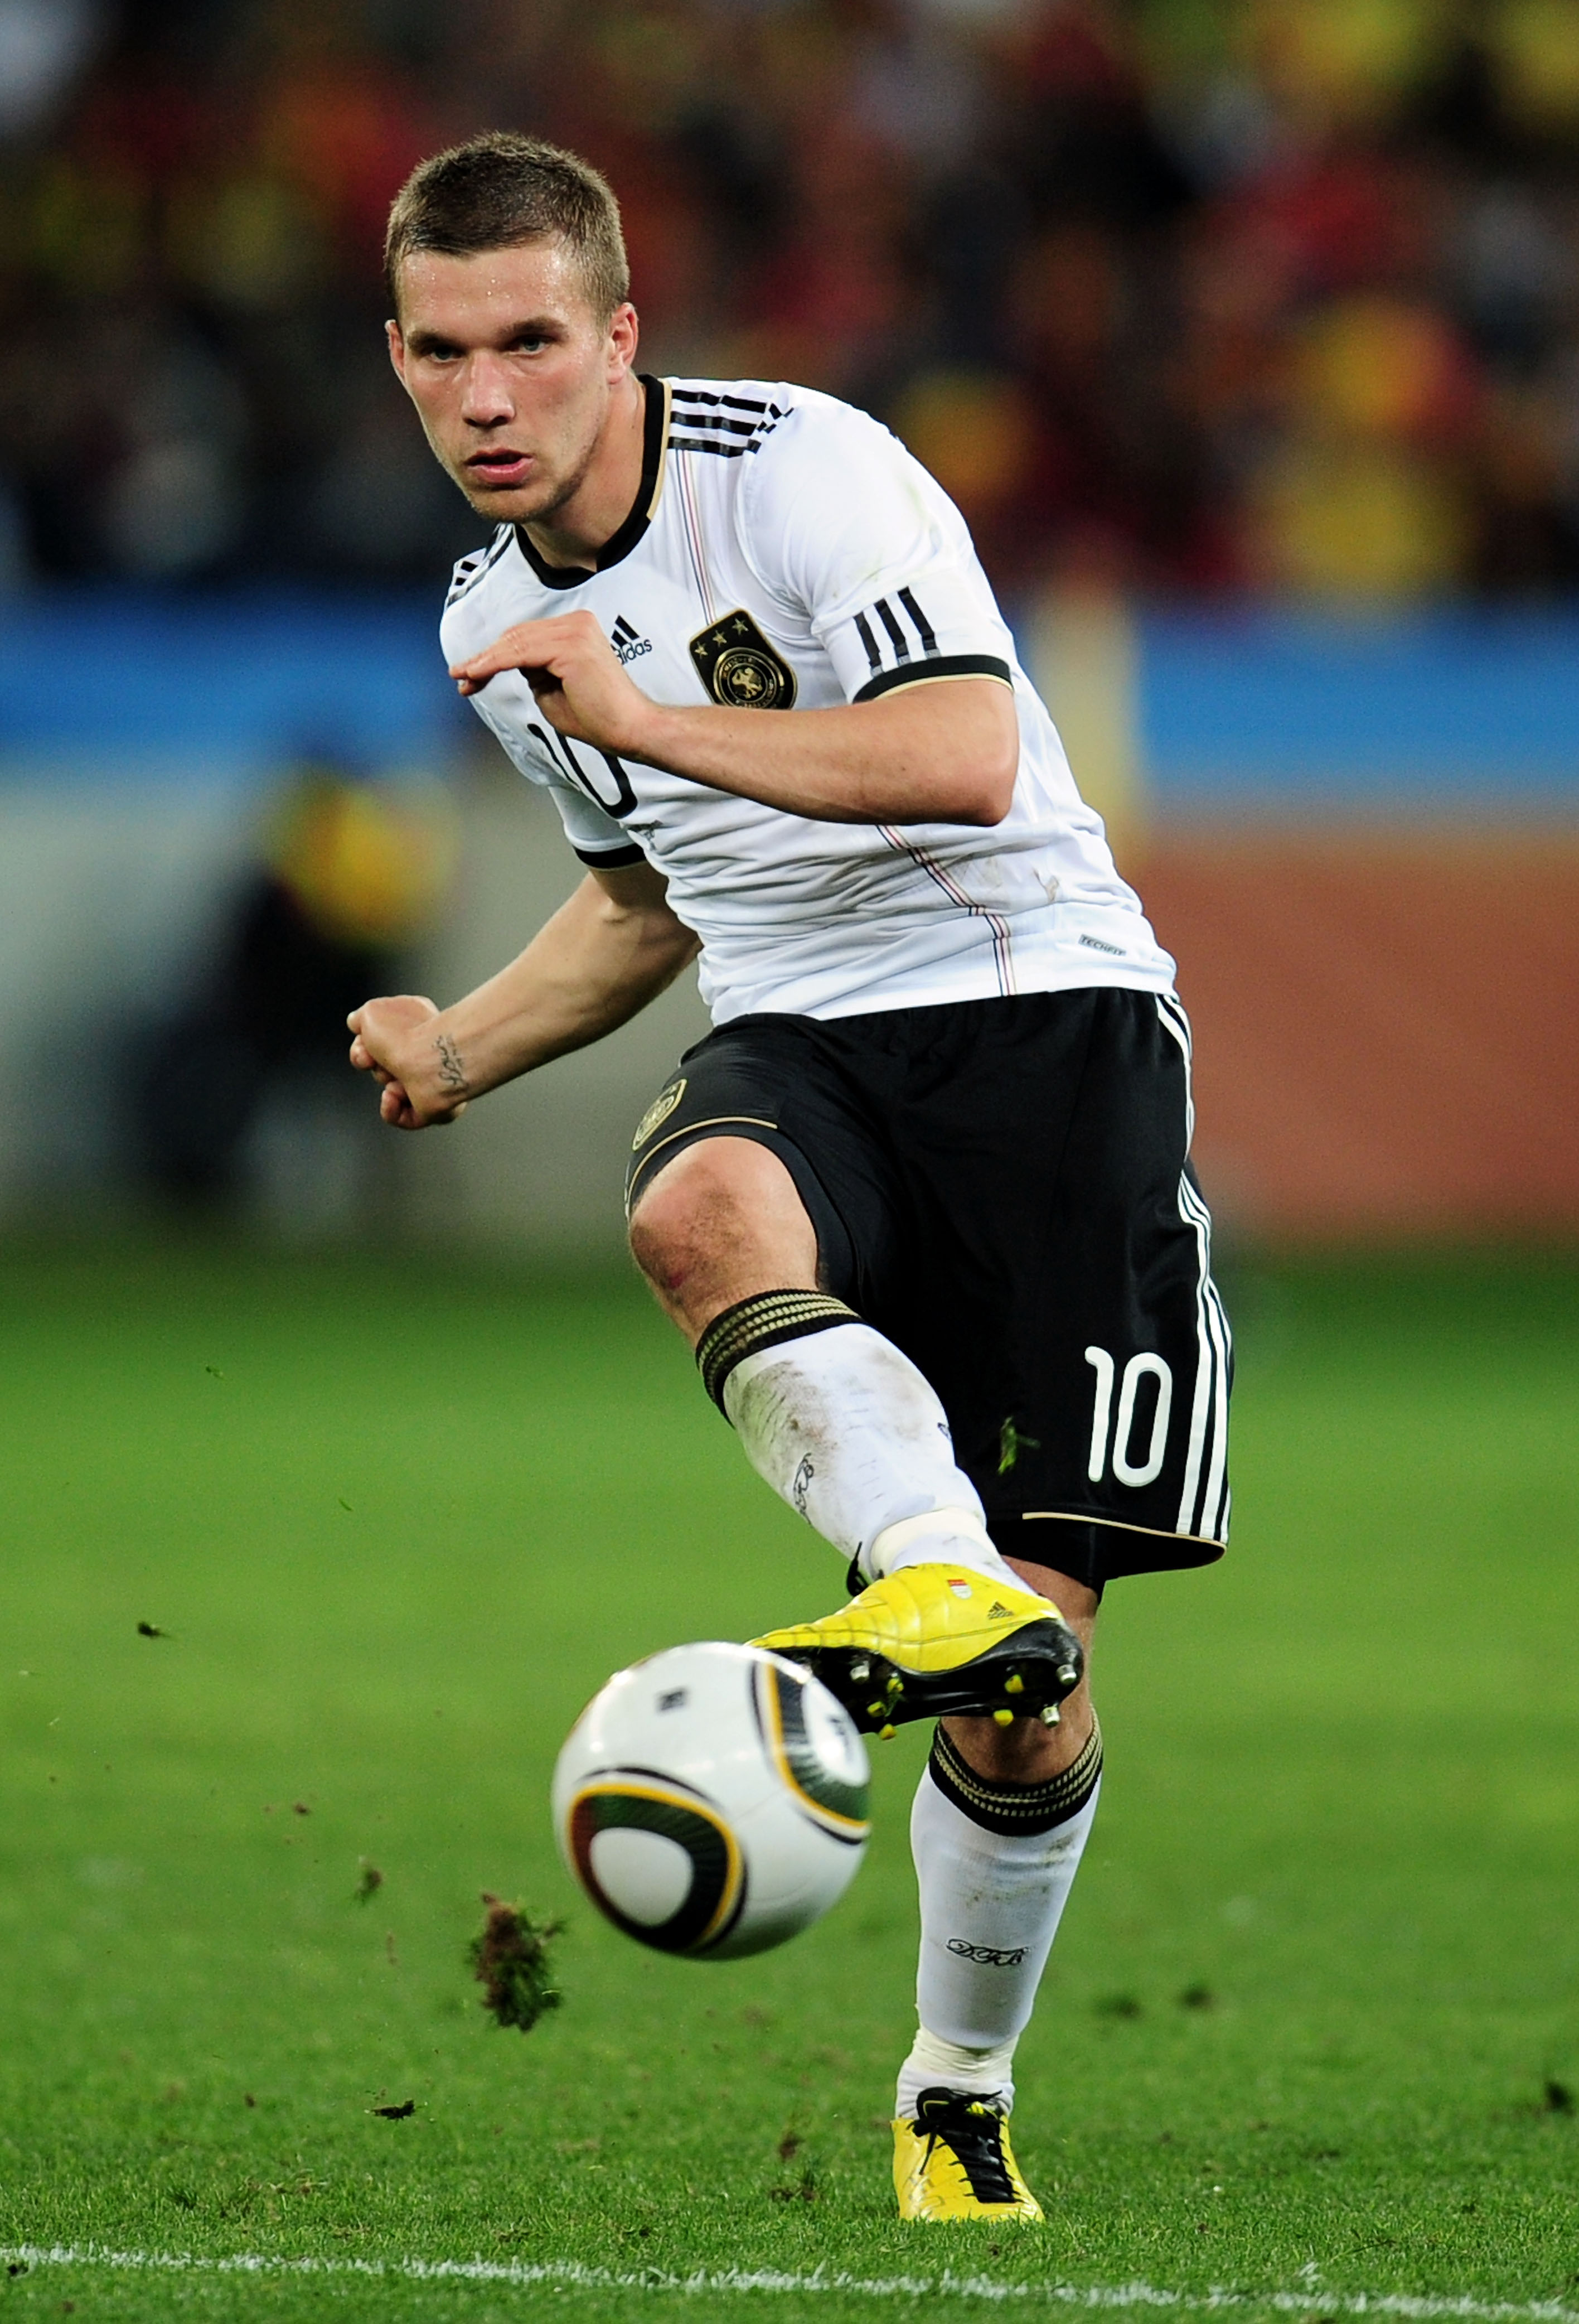 DURBAN, SOUTH AFRICA - JULY 07:  Lukas Podolski of Germany passes the ball during the 2010 FIFA World Cup South Africa Semi Final match between Germany and Spain at Durban Stadium on July 7, 2010 in Durban, South Africa.  (Photo by Clive Mason/Getty Image